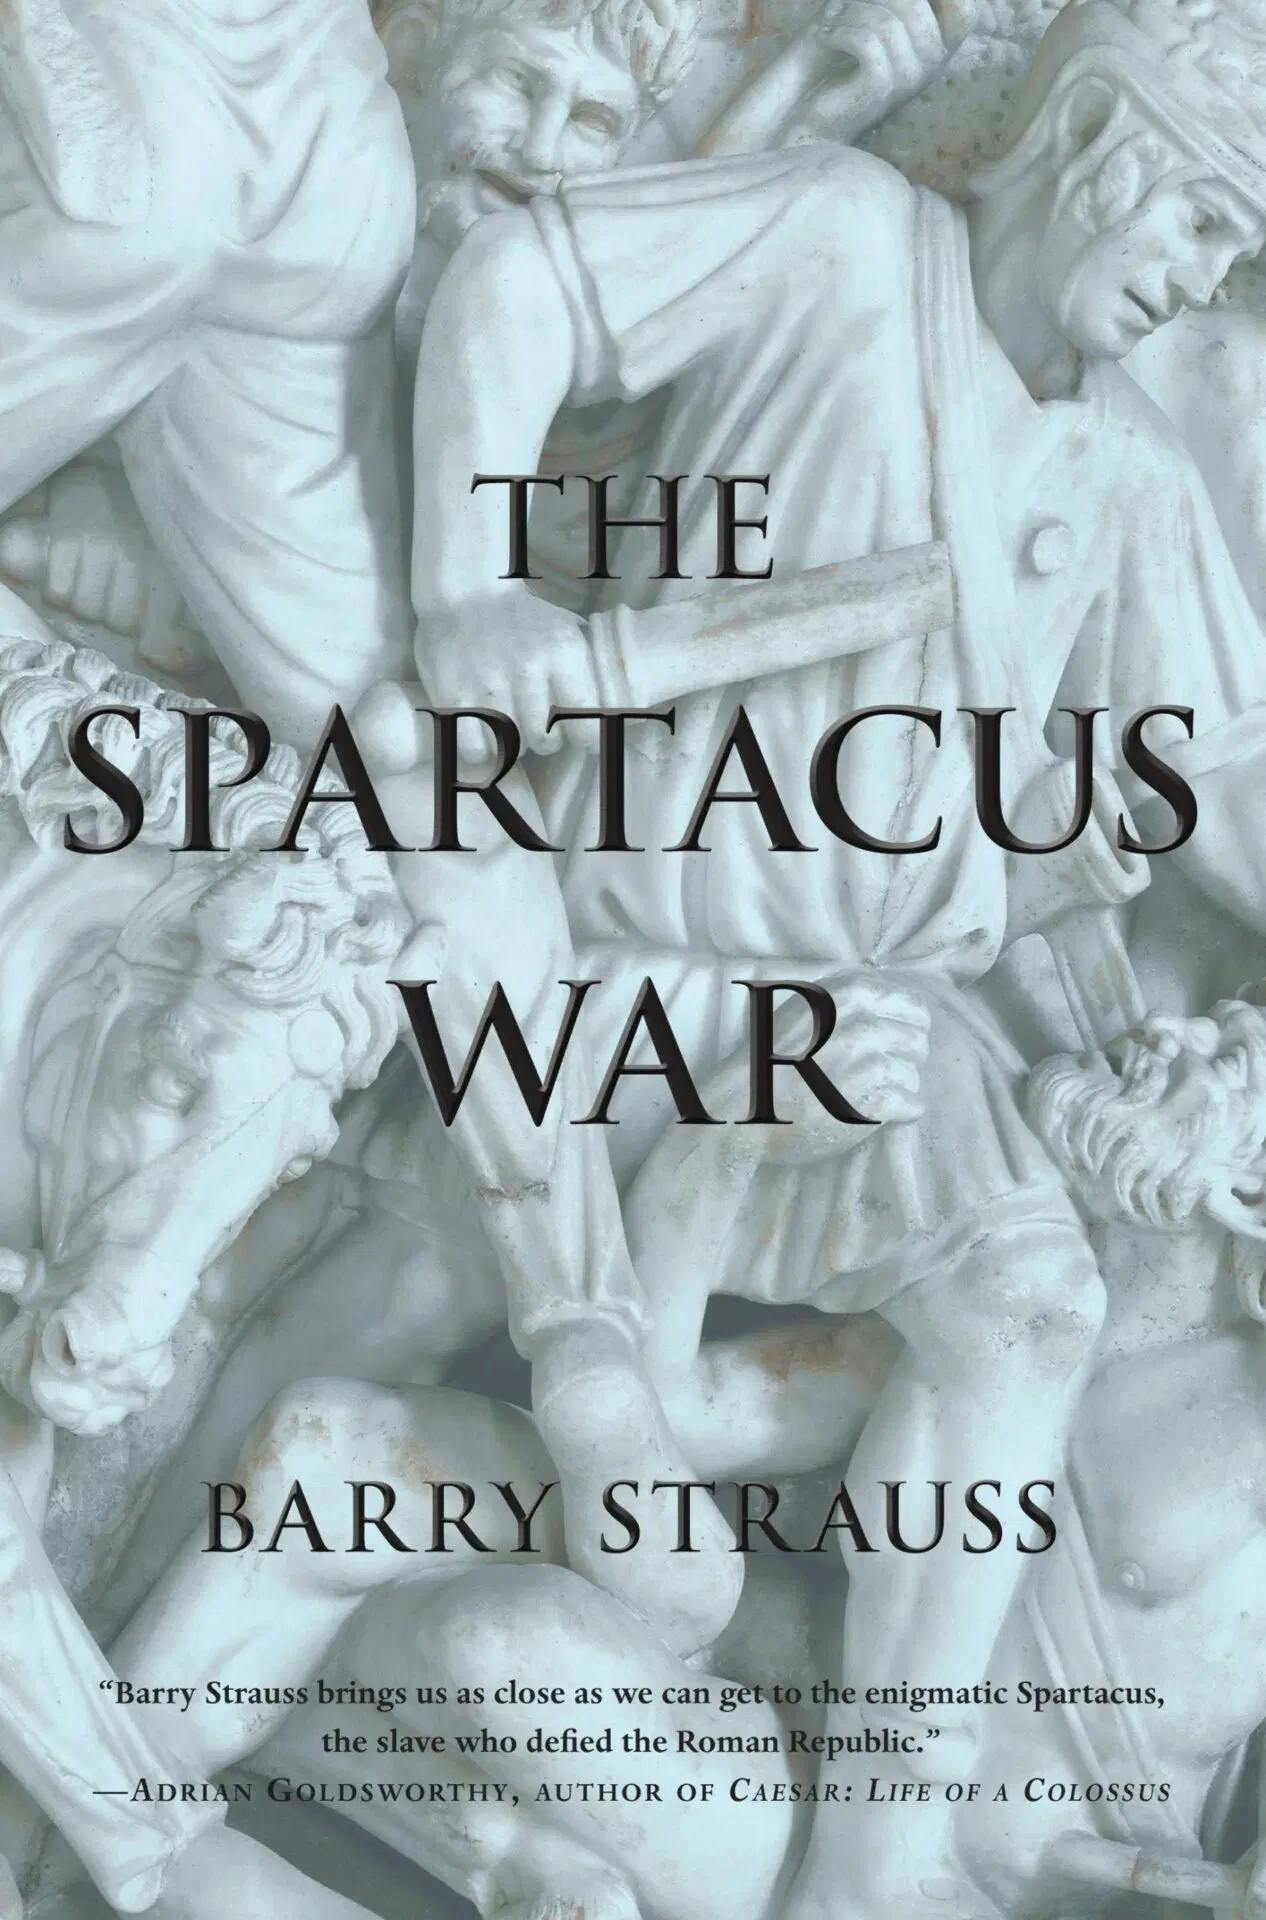 book cover: The Spartacus War by Barry Strauss; shows close up of marblee carving of roman warriors in battle